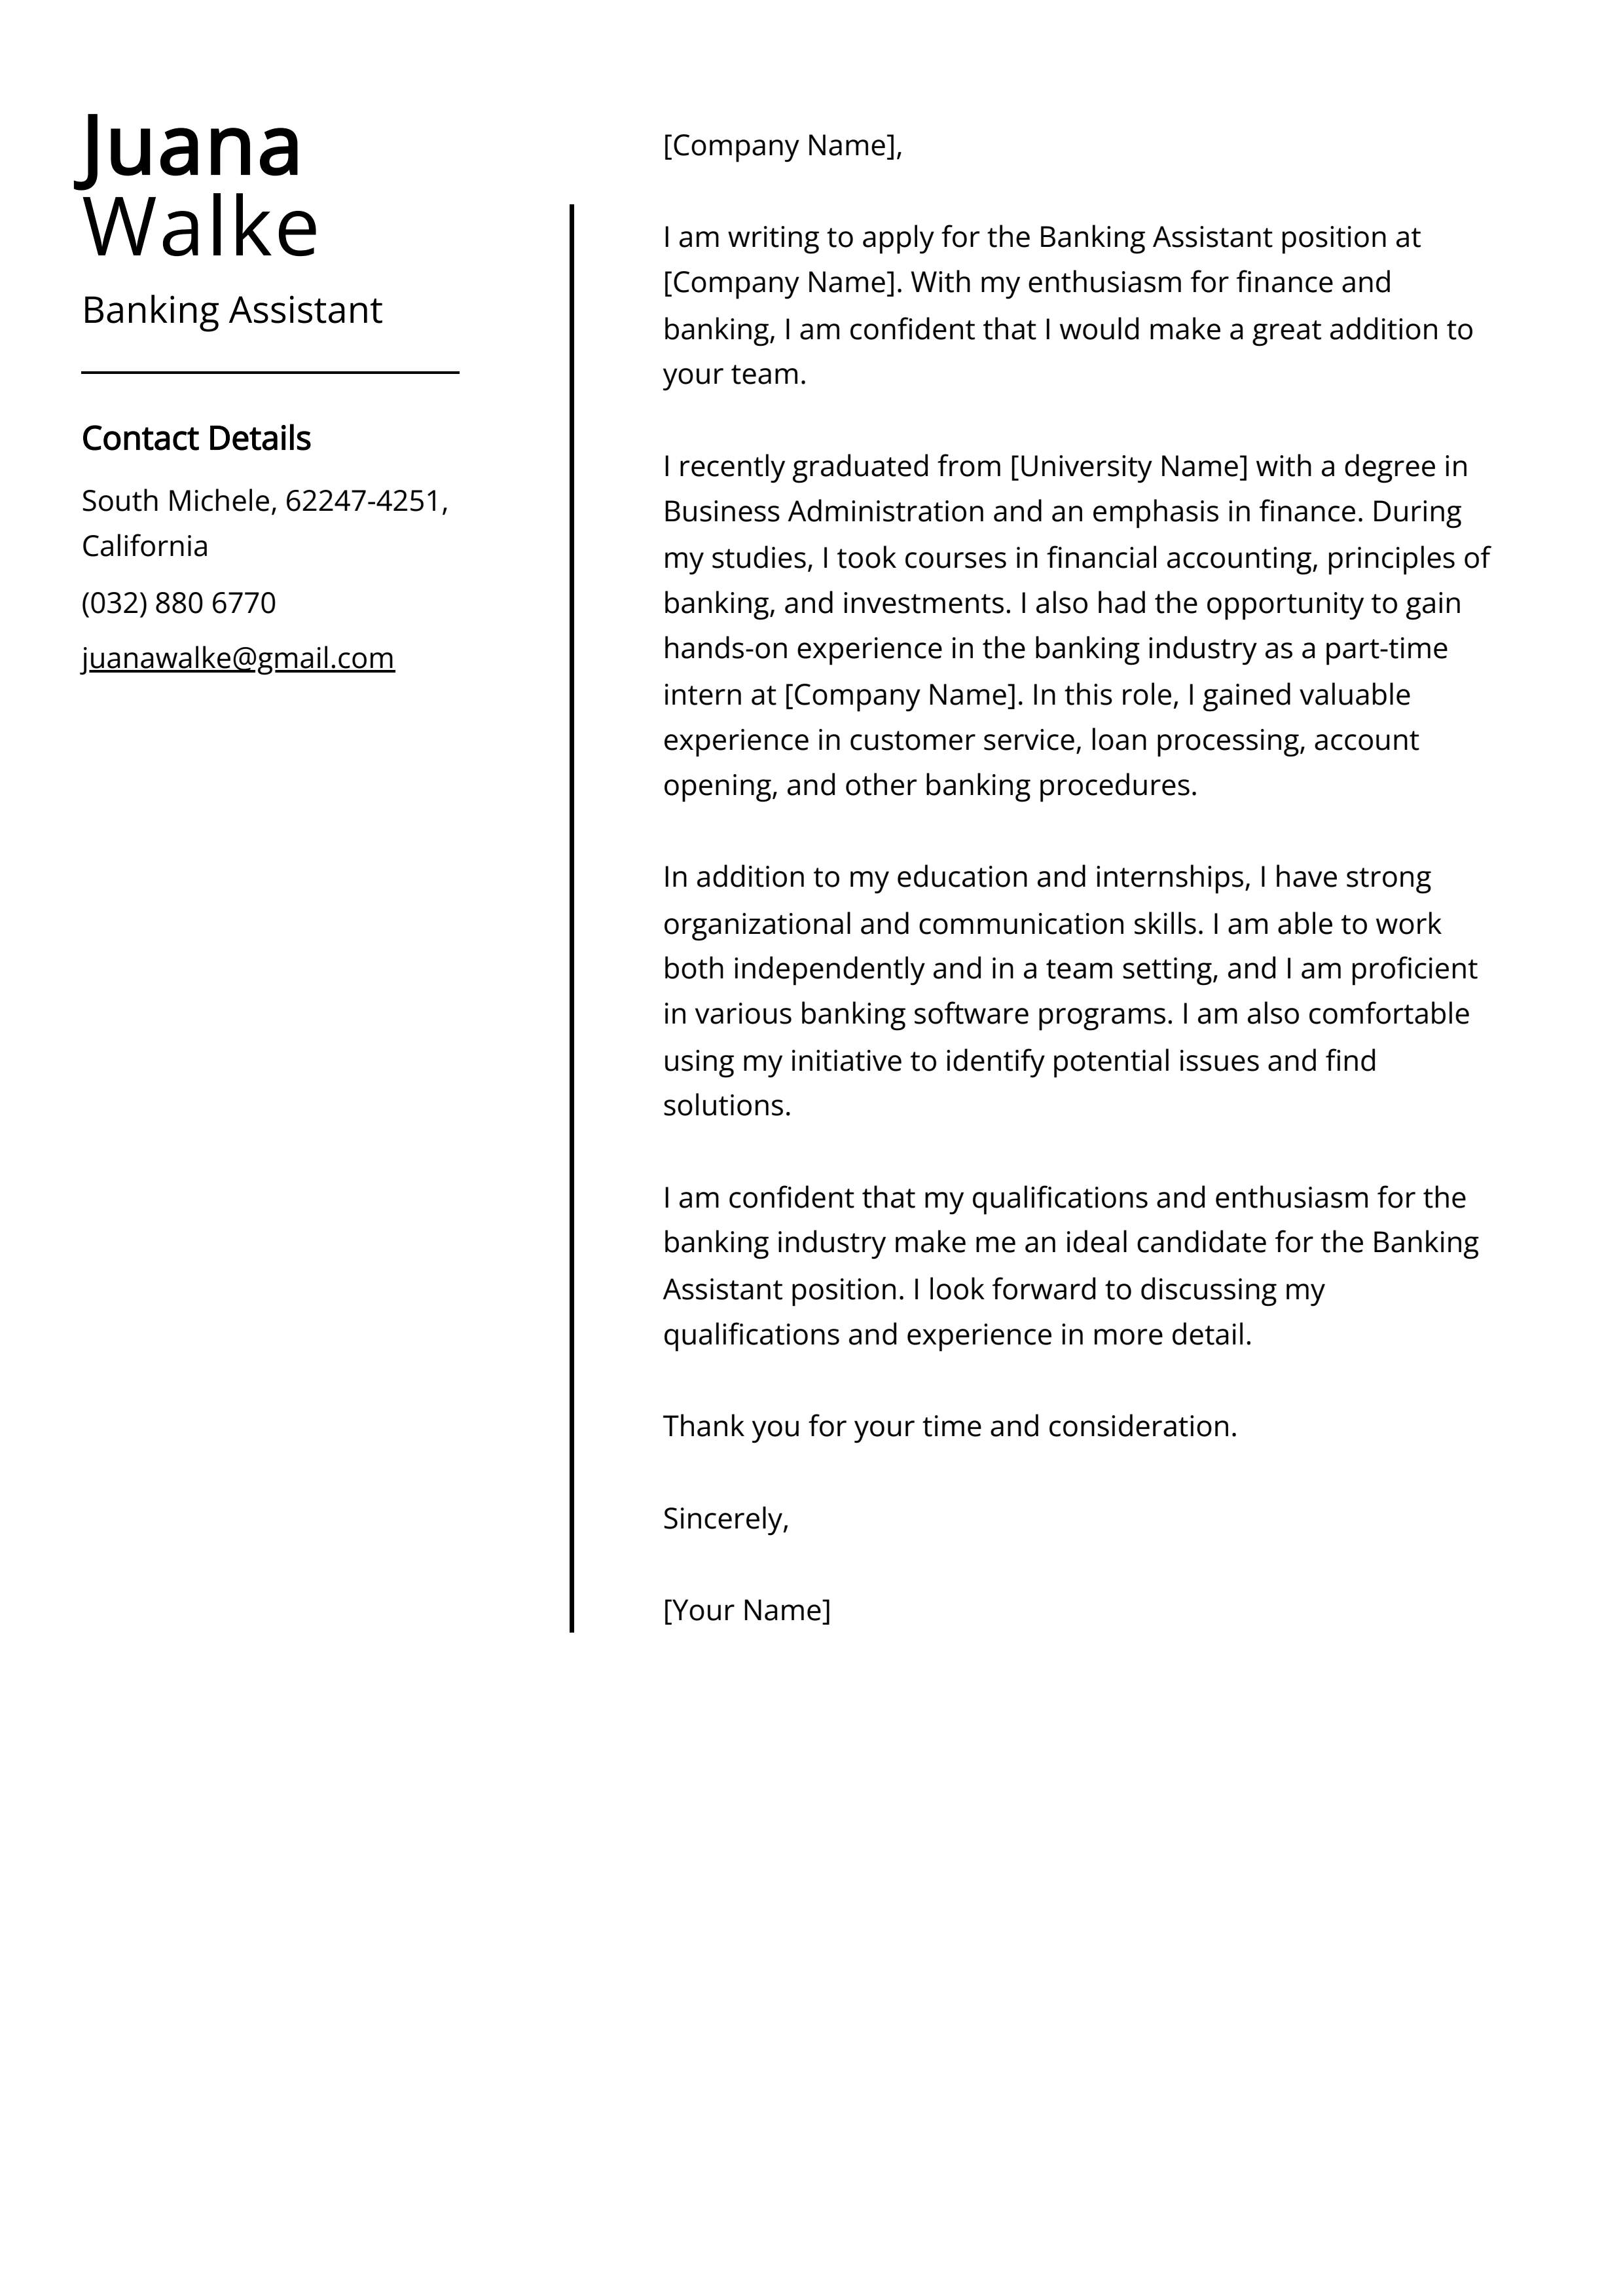 Banking Assistant Cover Letter Example